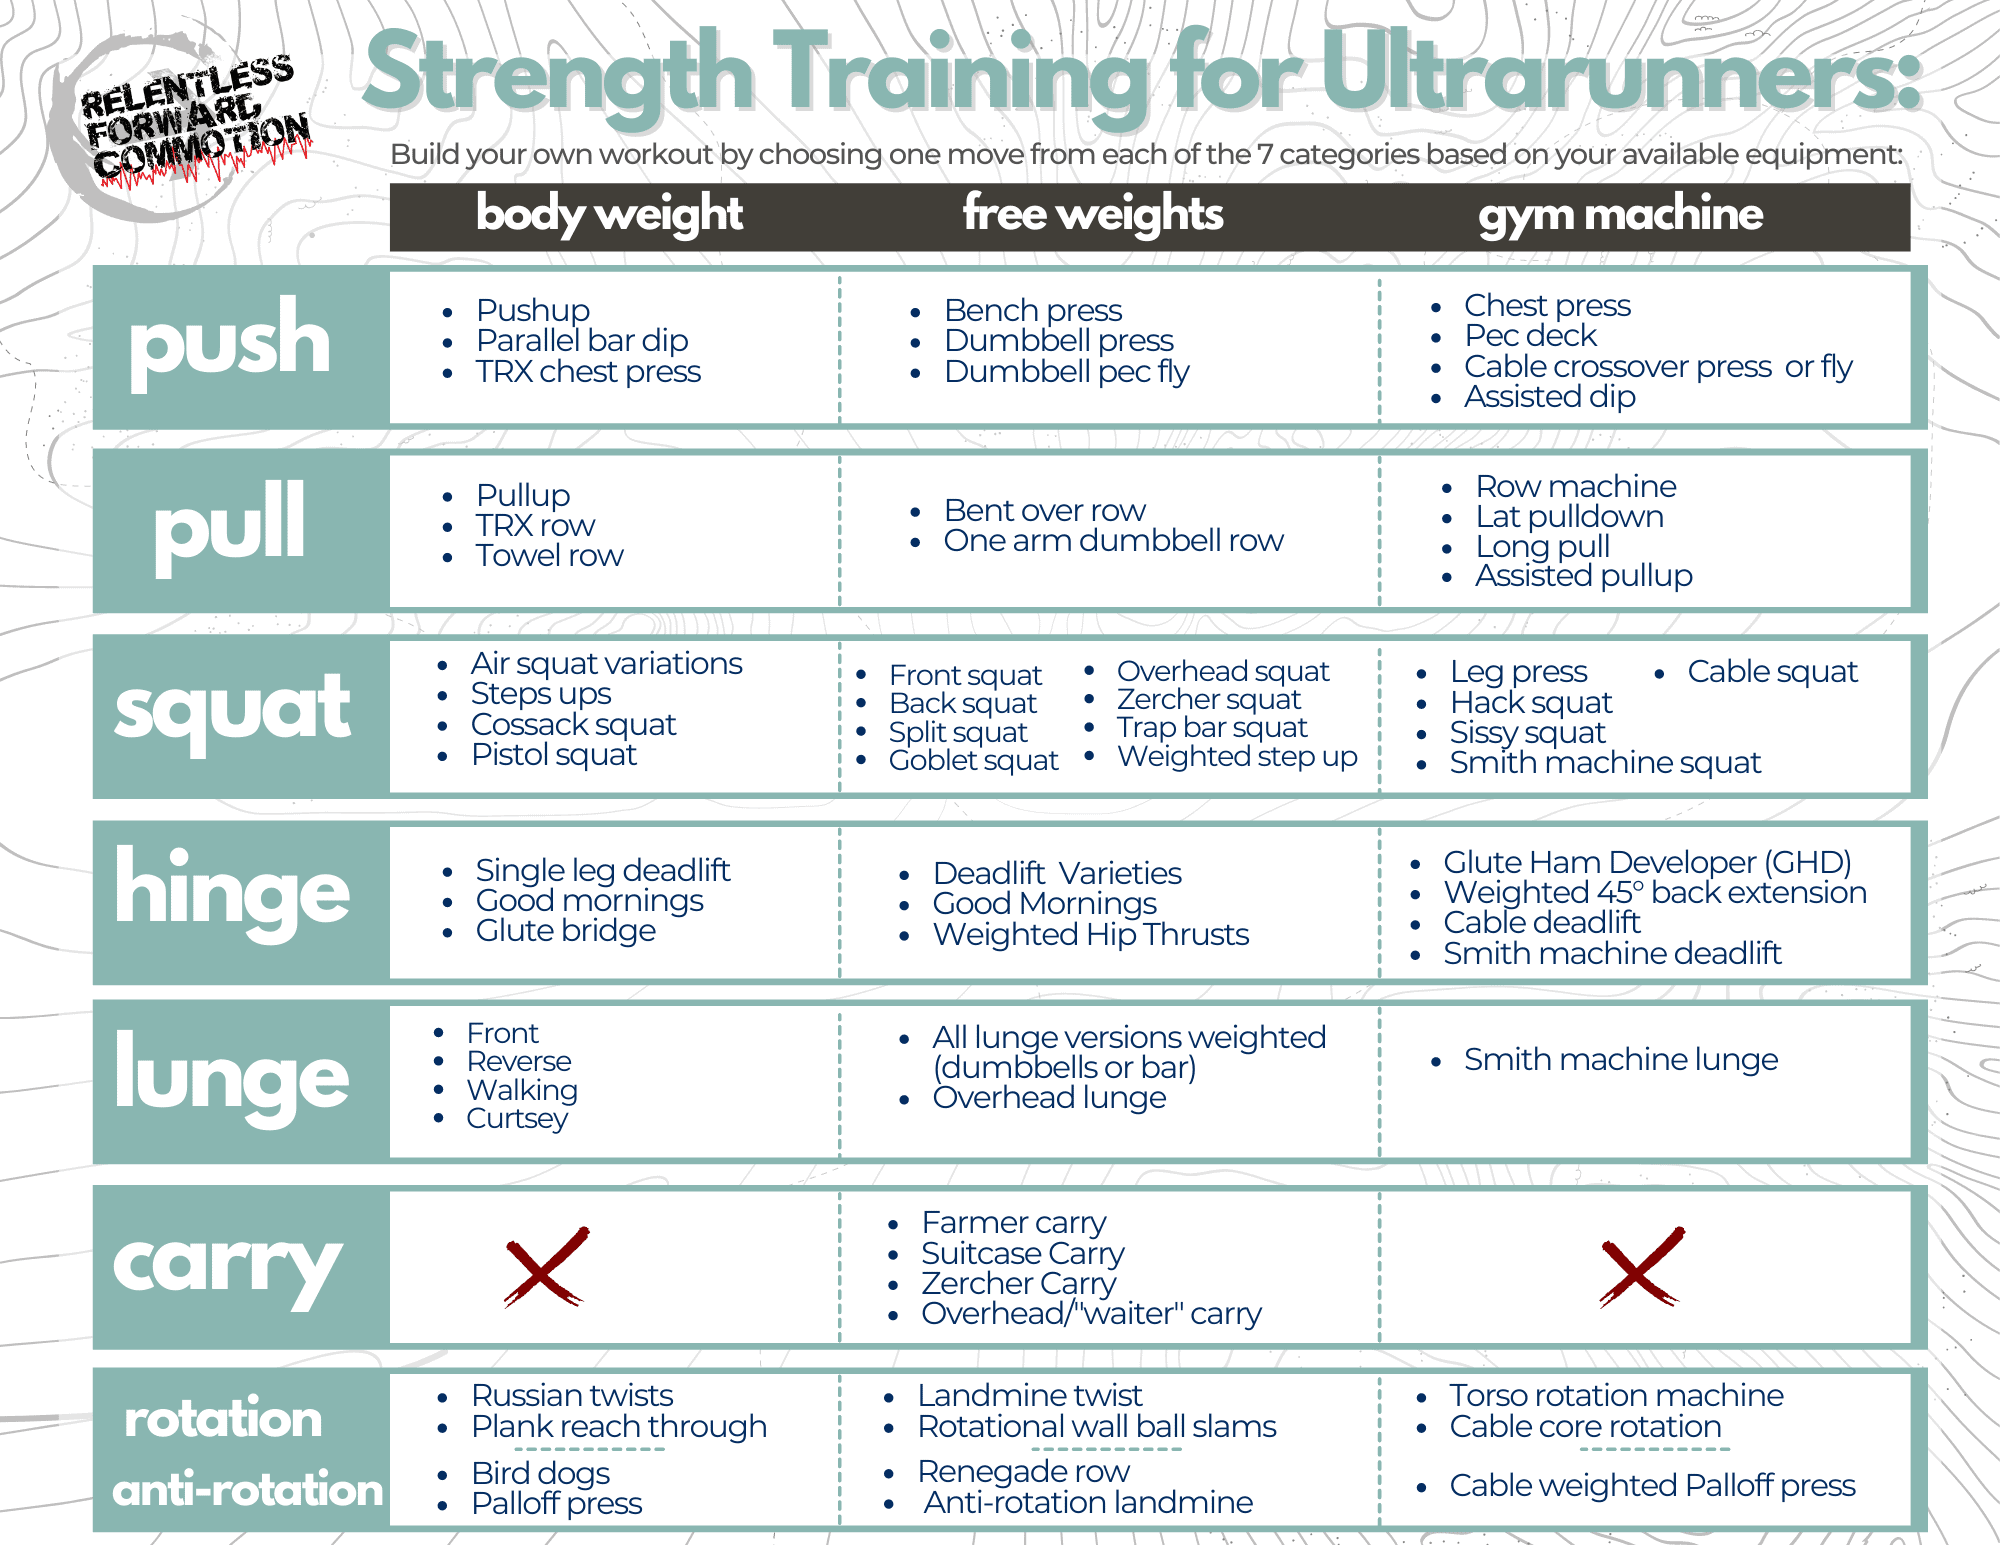 Strength Training for Runners (Complete Programs and Plans)